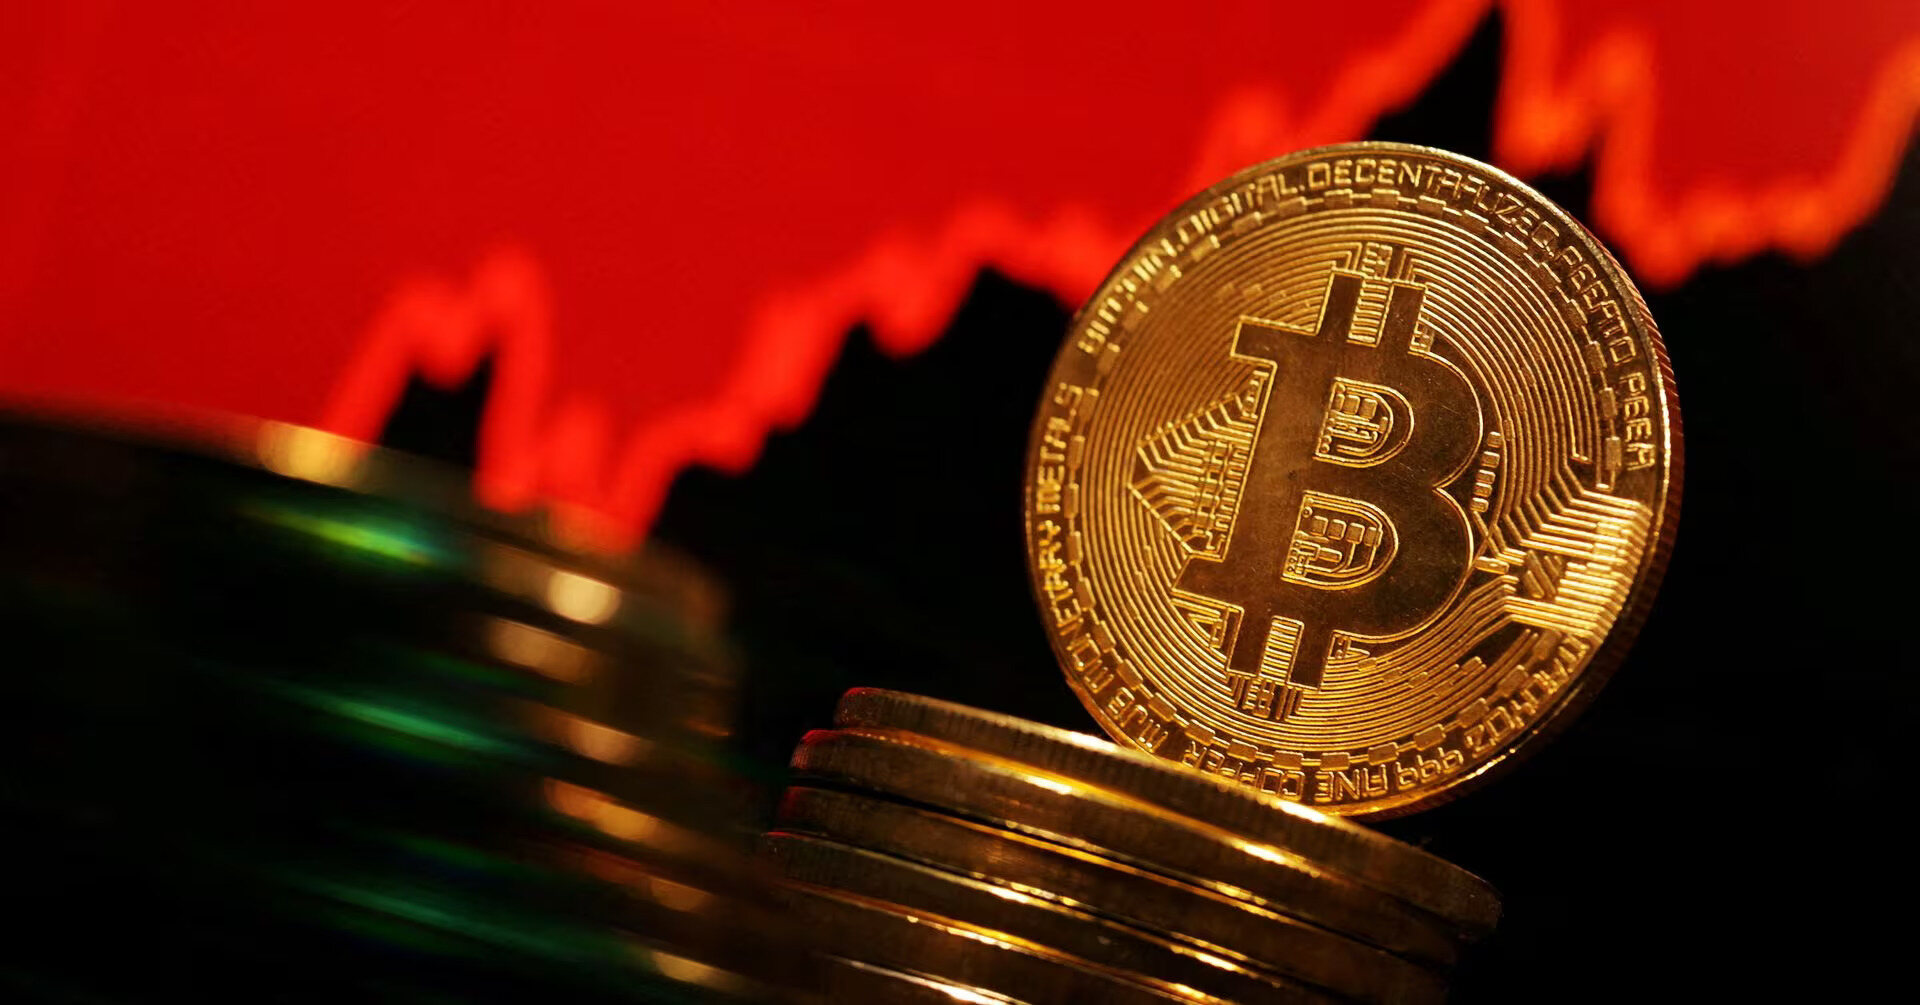 Spot Bitcoin ETF Volumes Surge, Bitwise Asset Management Predicts Continued Growth